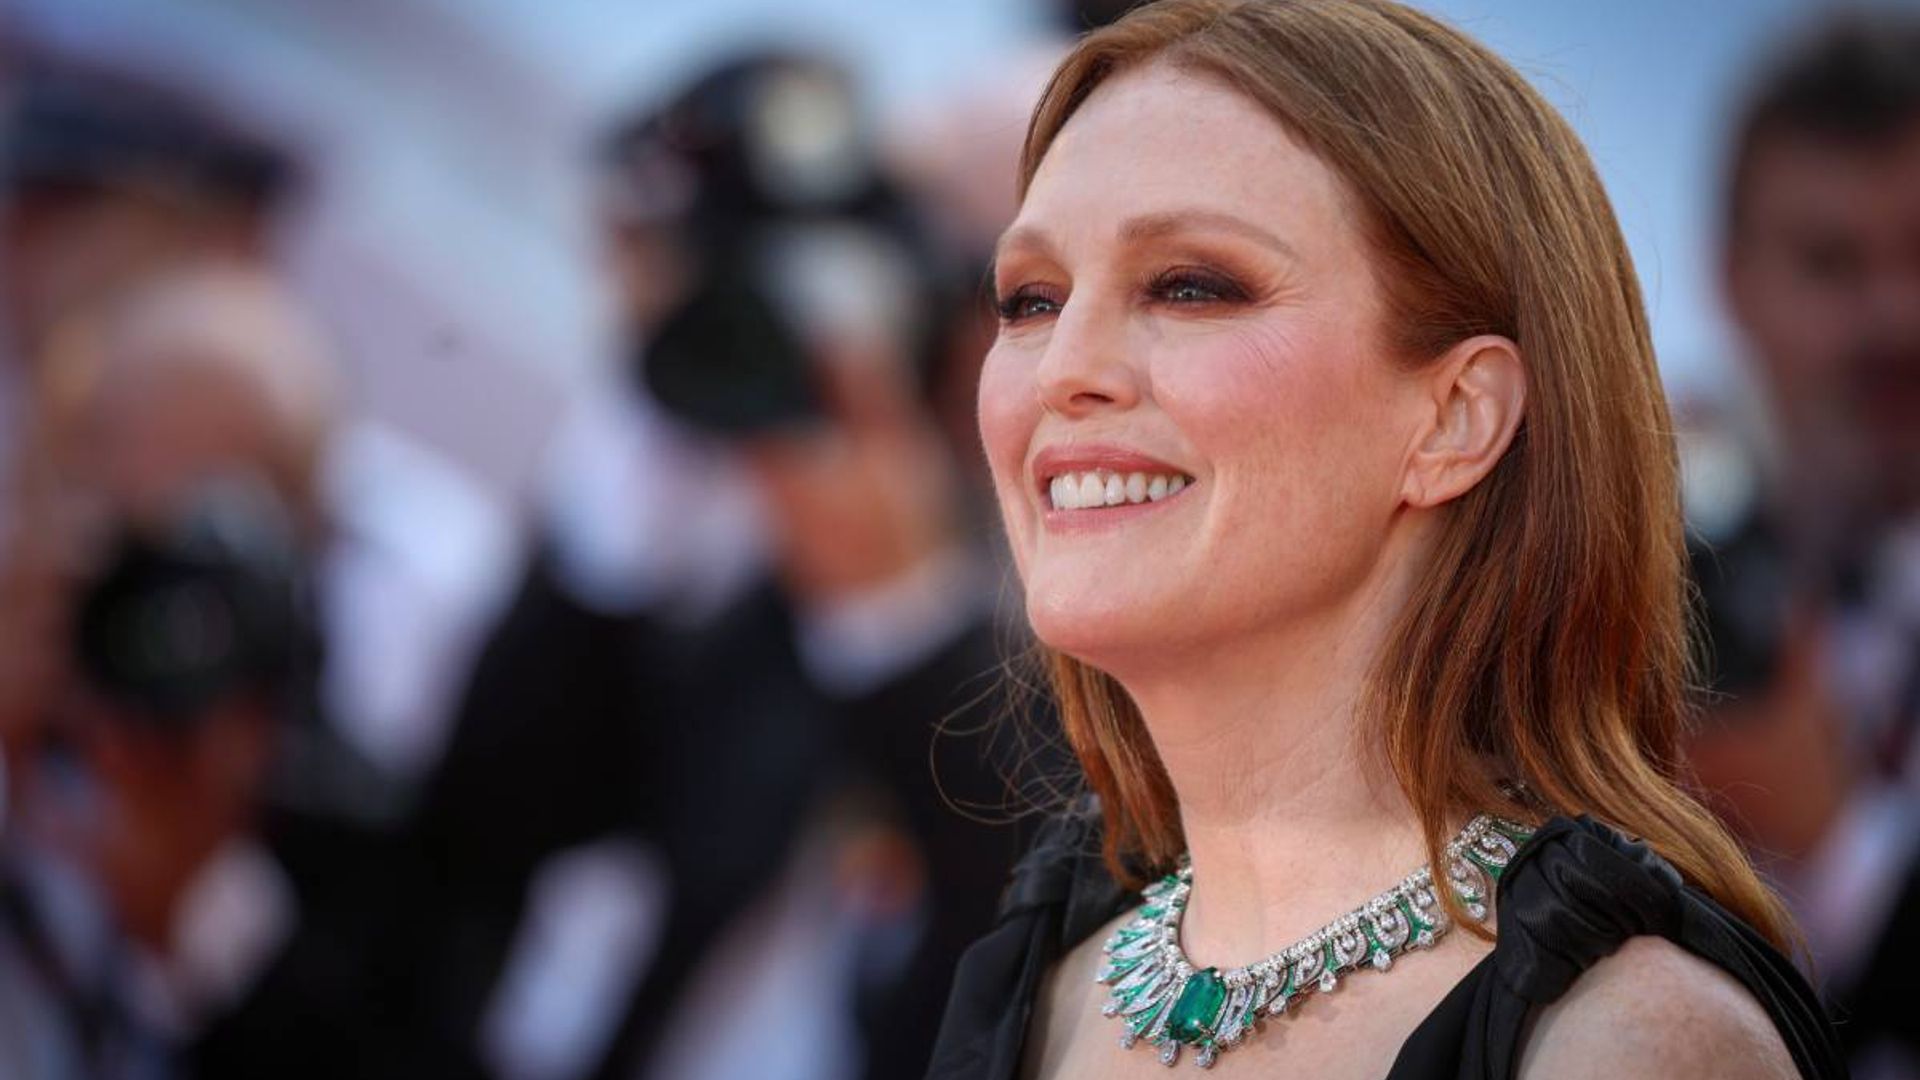 Julianne Moore dazzles in a form fitting gown for star-studded event